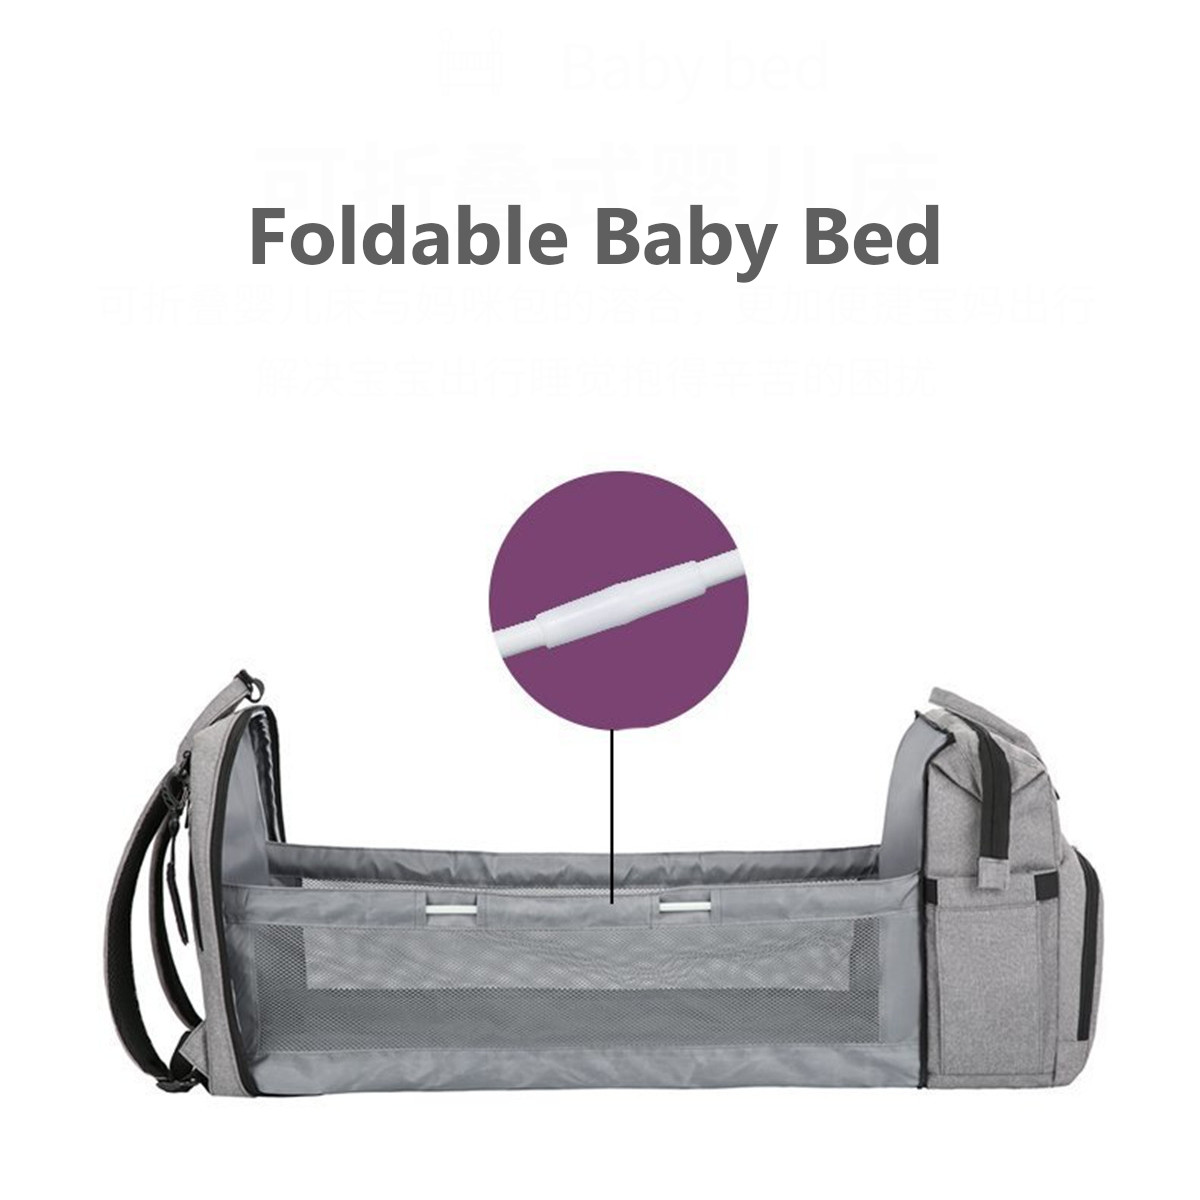 Multifunctional-Waterproof-Mummy-Bag-Portable-Diaper-Bag-Large-capacity-Folding-Bed-Bag-Out-of-bed-B-1916752-5